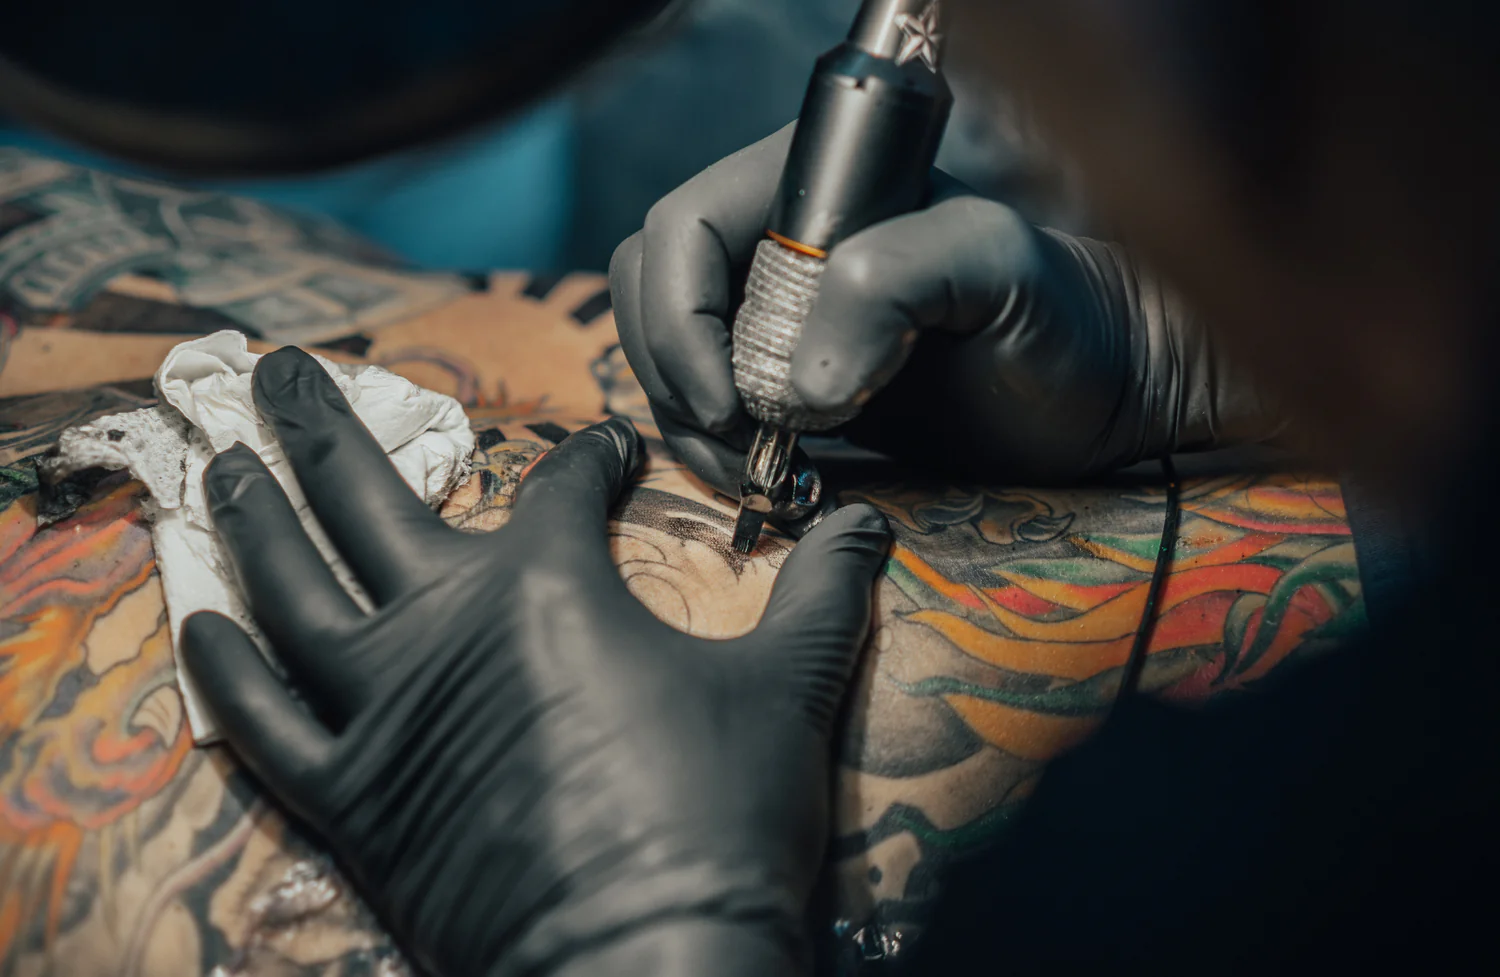 Essential techniques for a professional tattoo artist